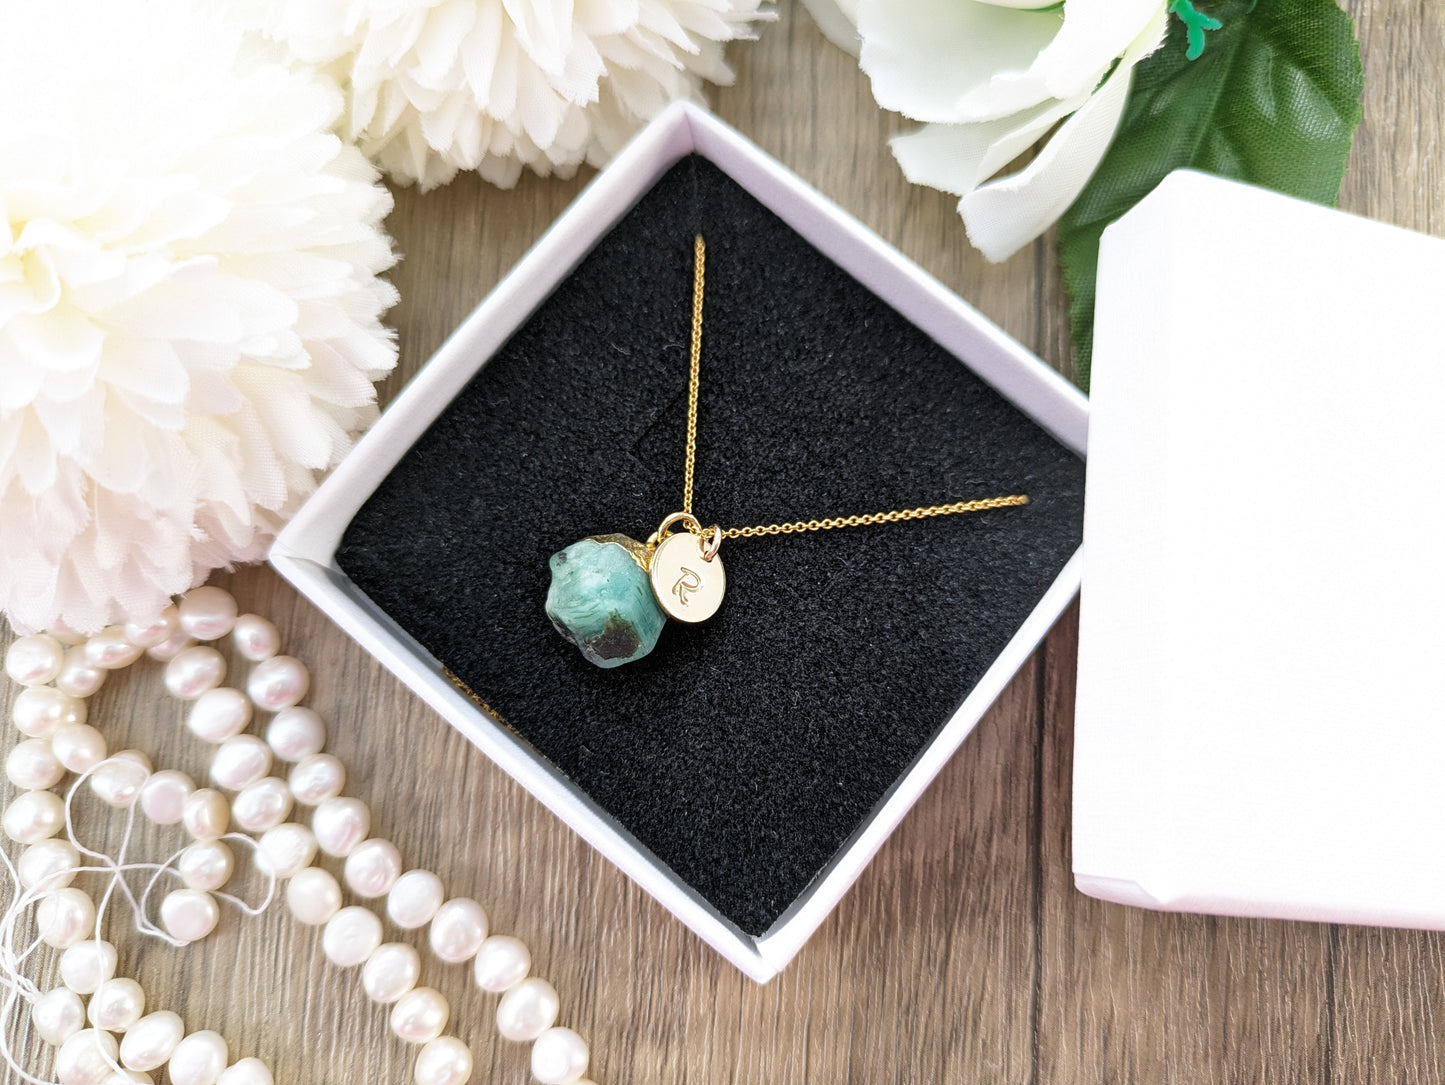 Personalised emerald necklace in gold.